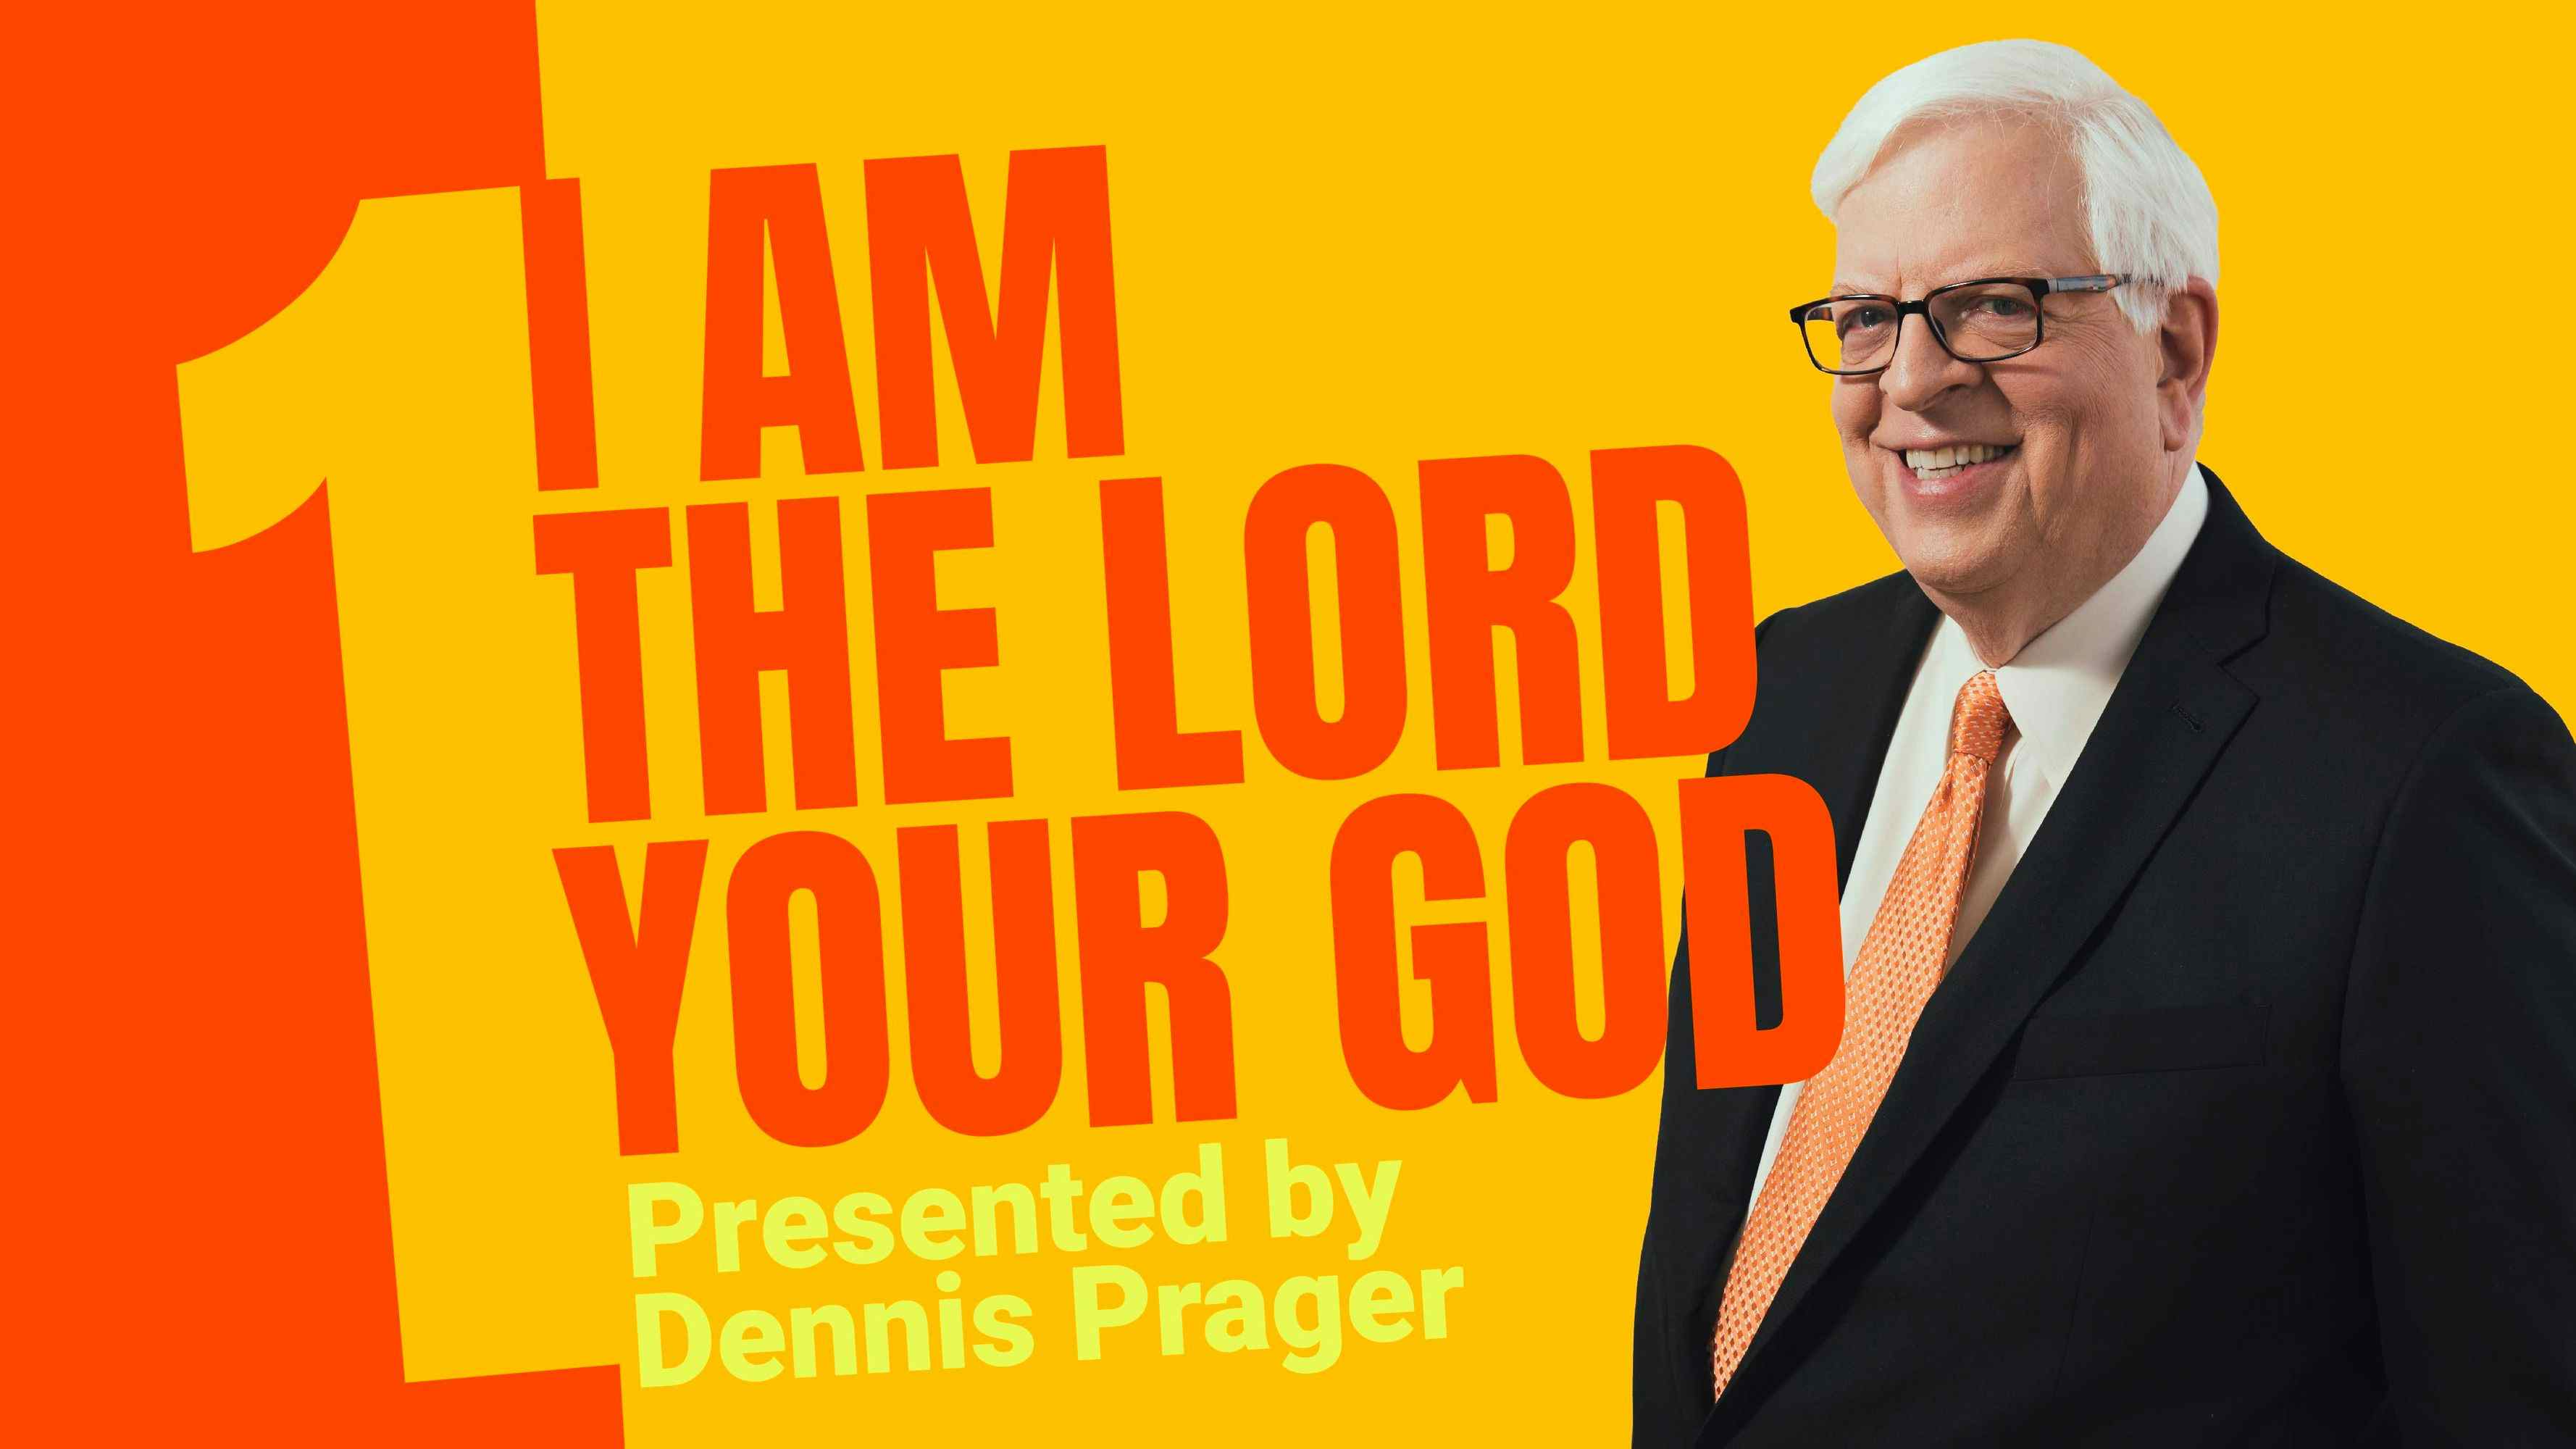 I Am the Lord Your God